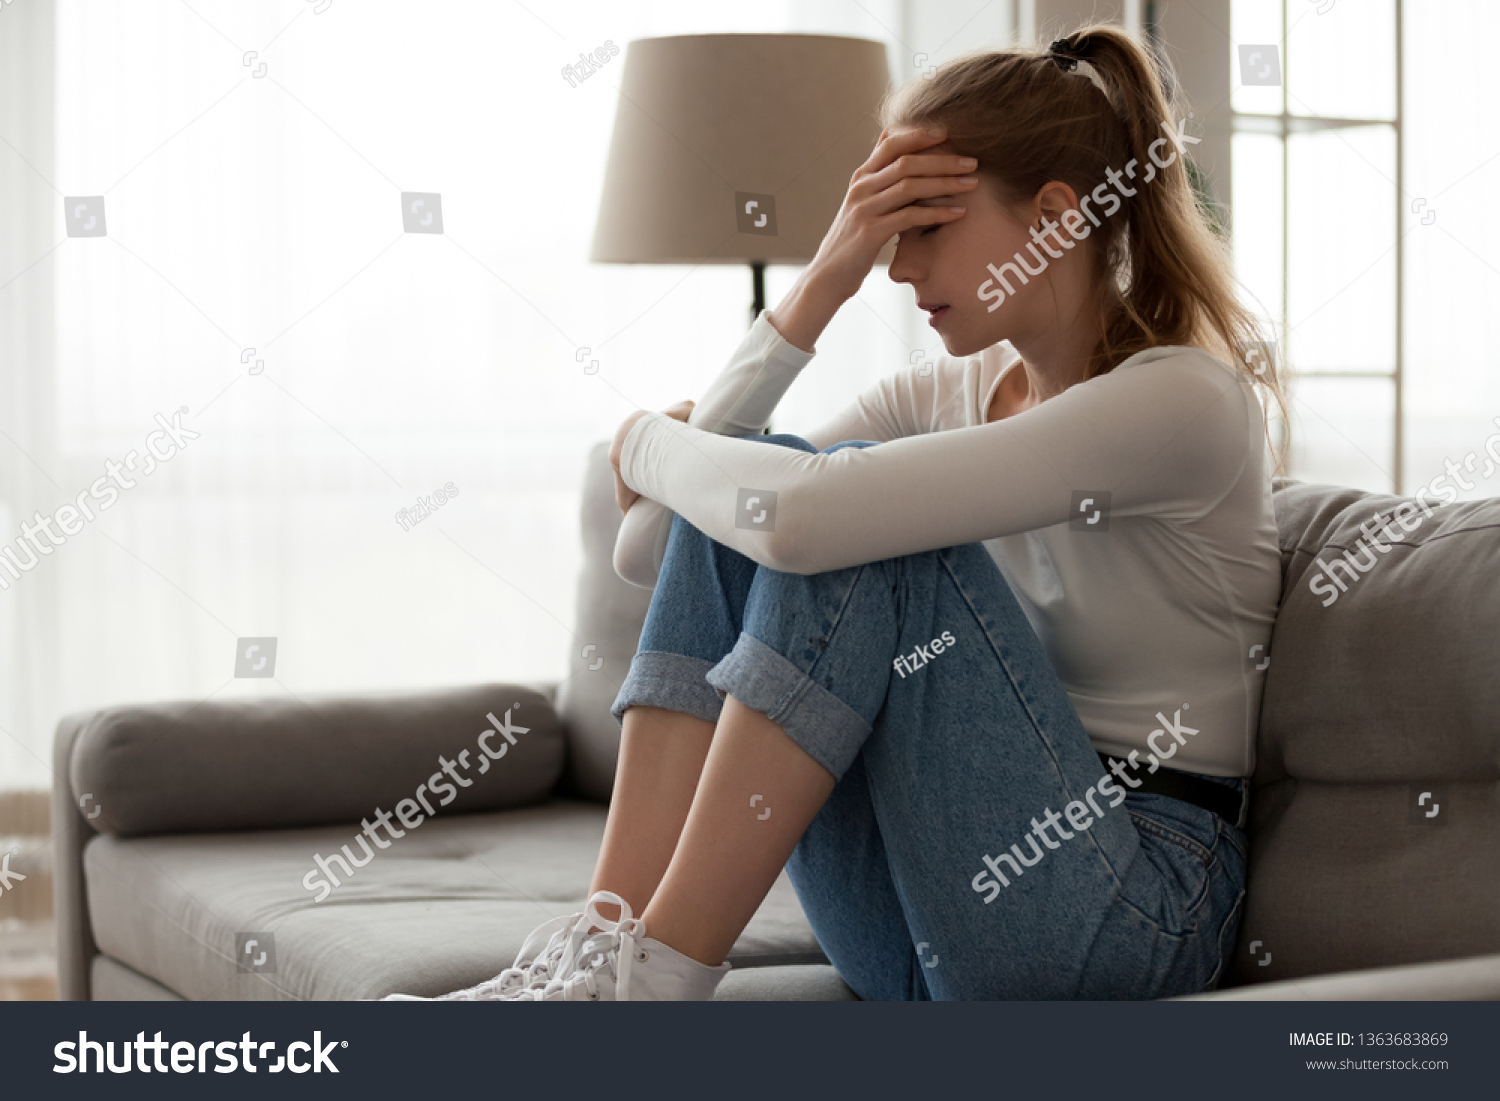 Upset woman frustrated by problem with work or relationships, sitting on couch, embracing knees, covered face in hand, feeling despair and anxiety, loneliness, having psychological trouble #1363683869